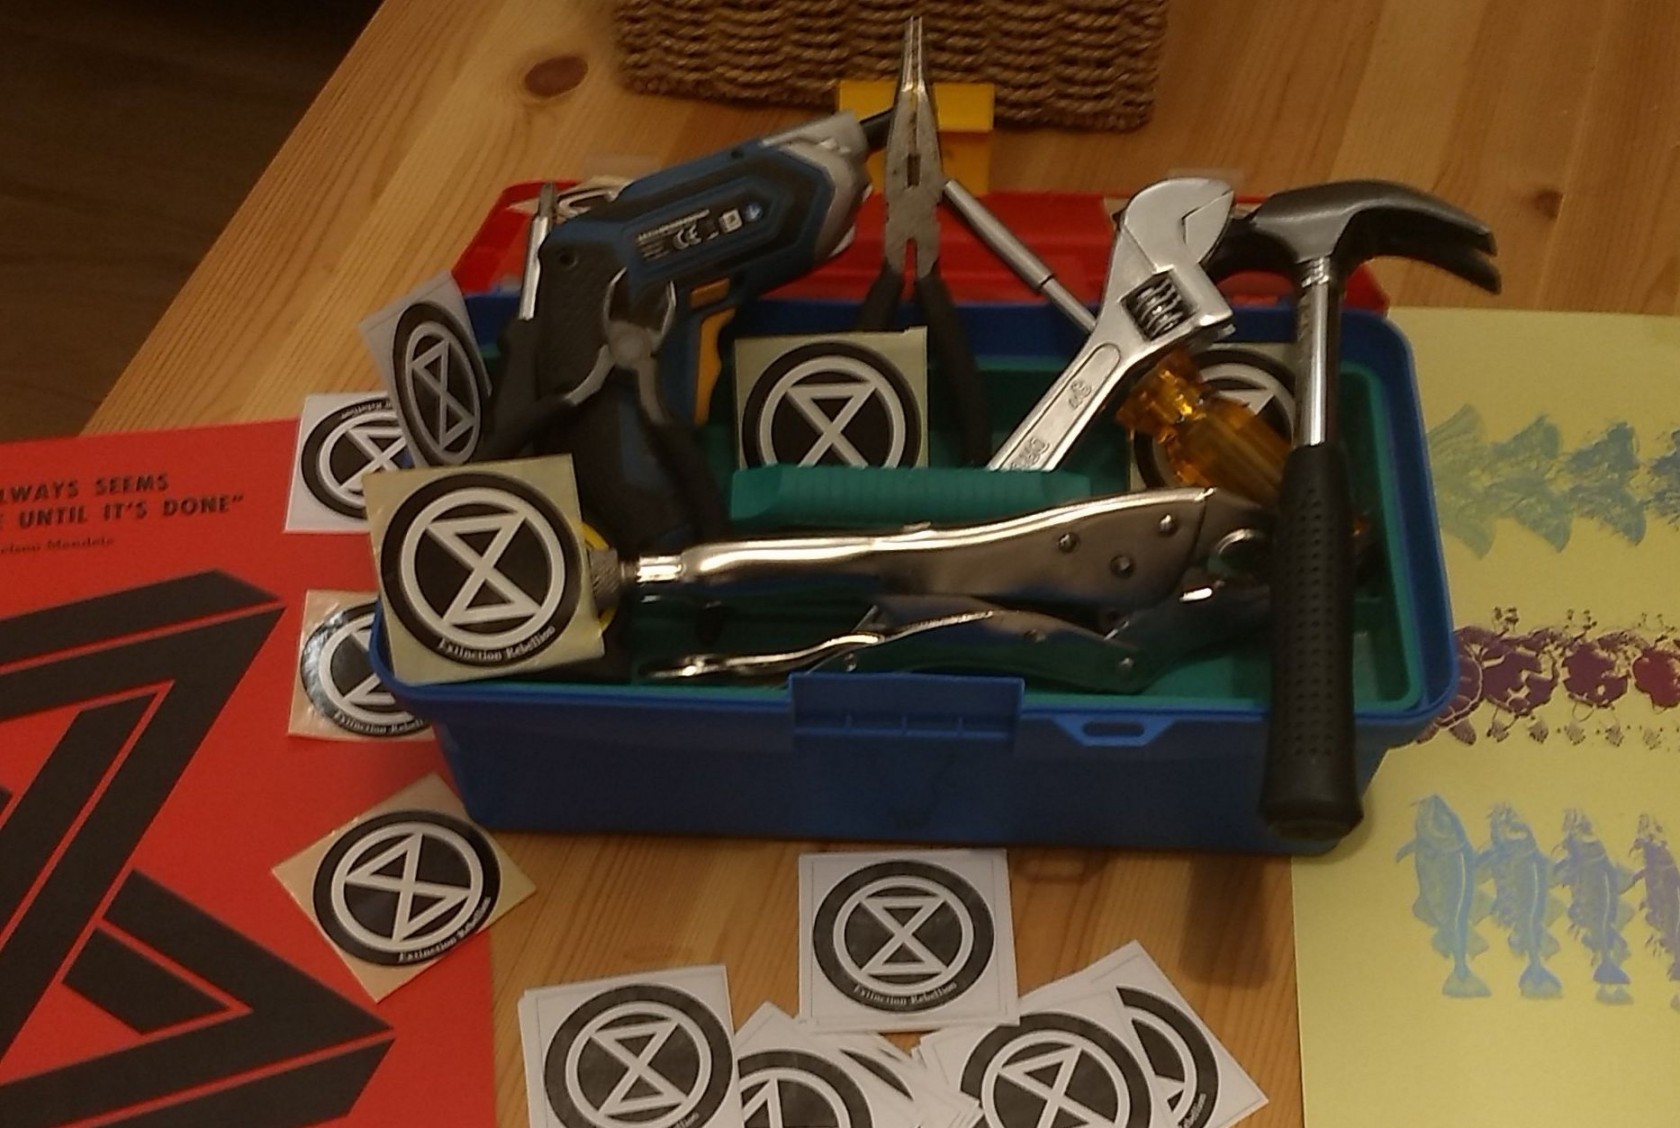 A toolbox with XR stickers